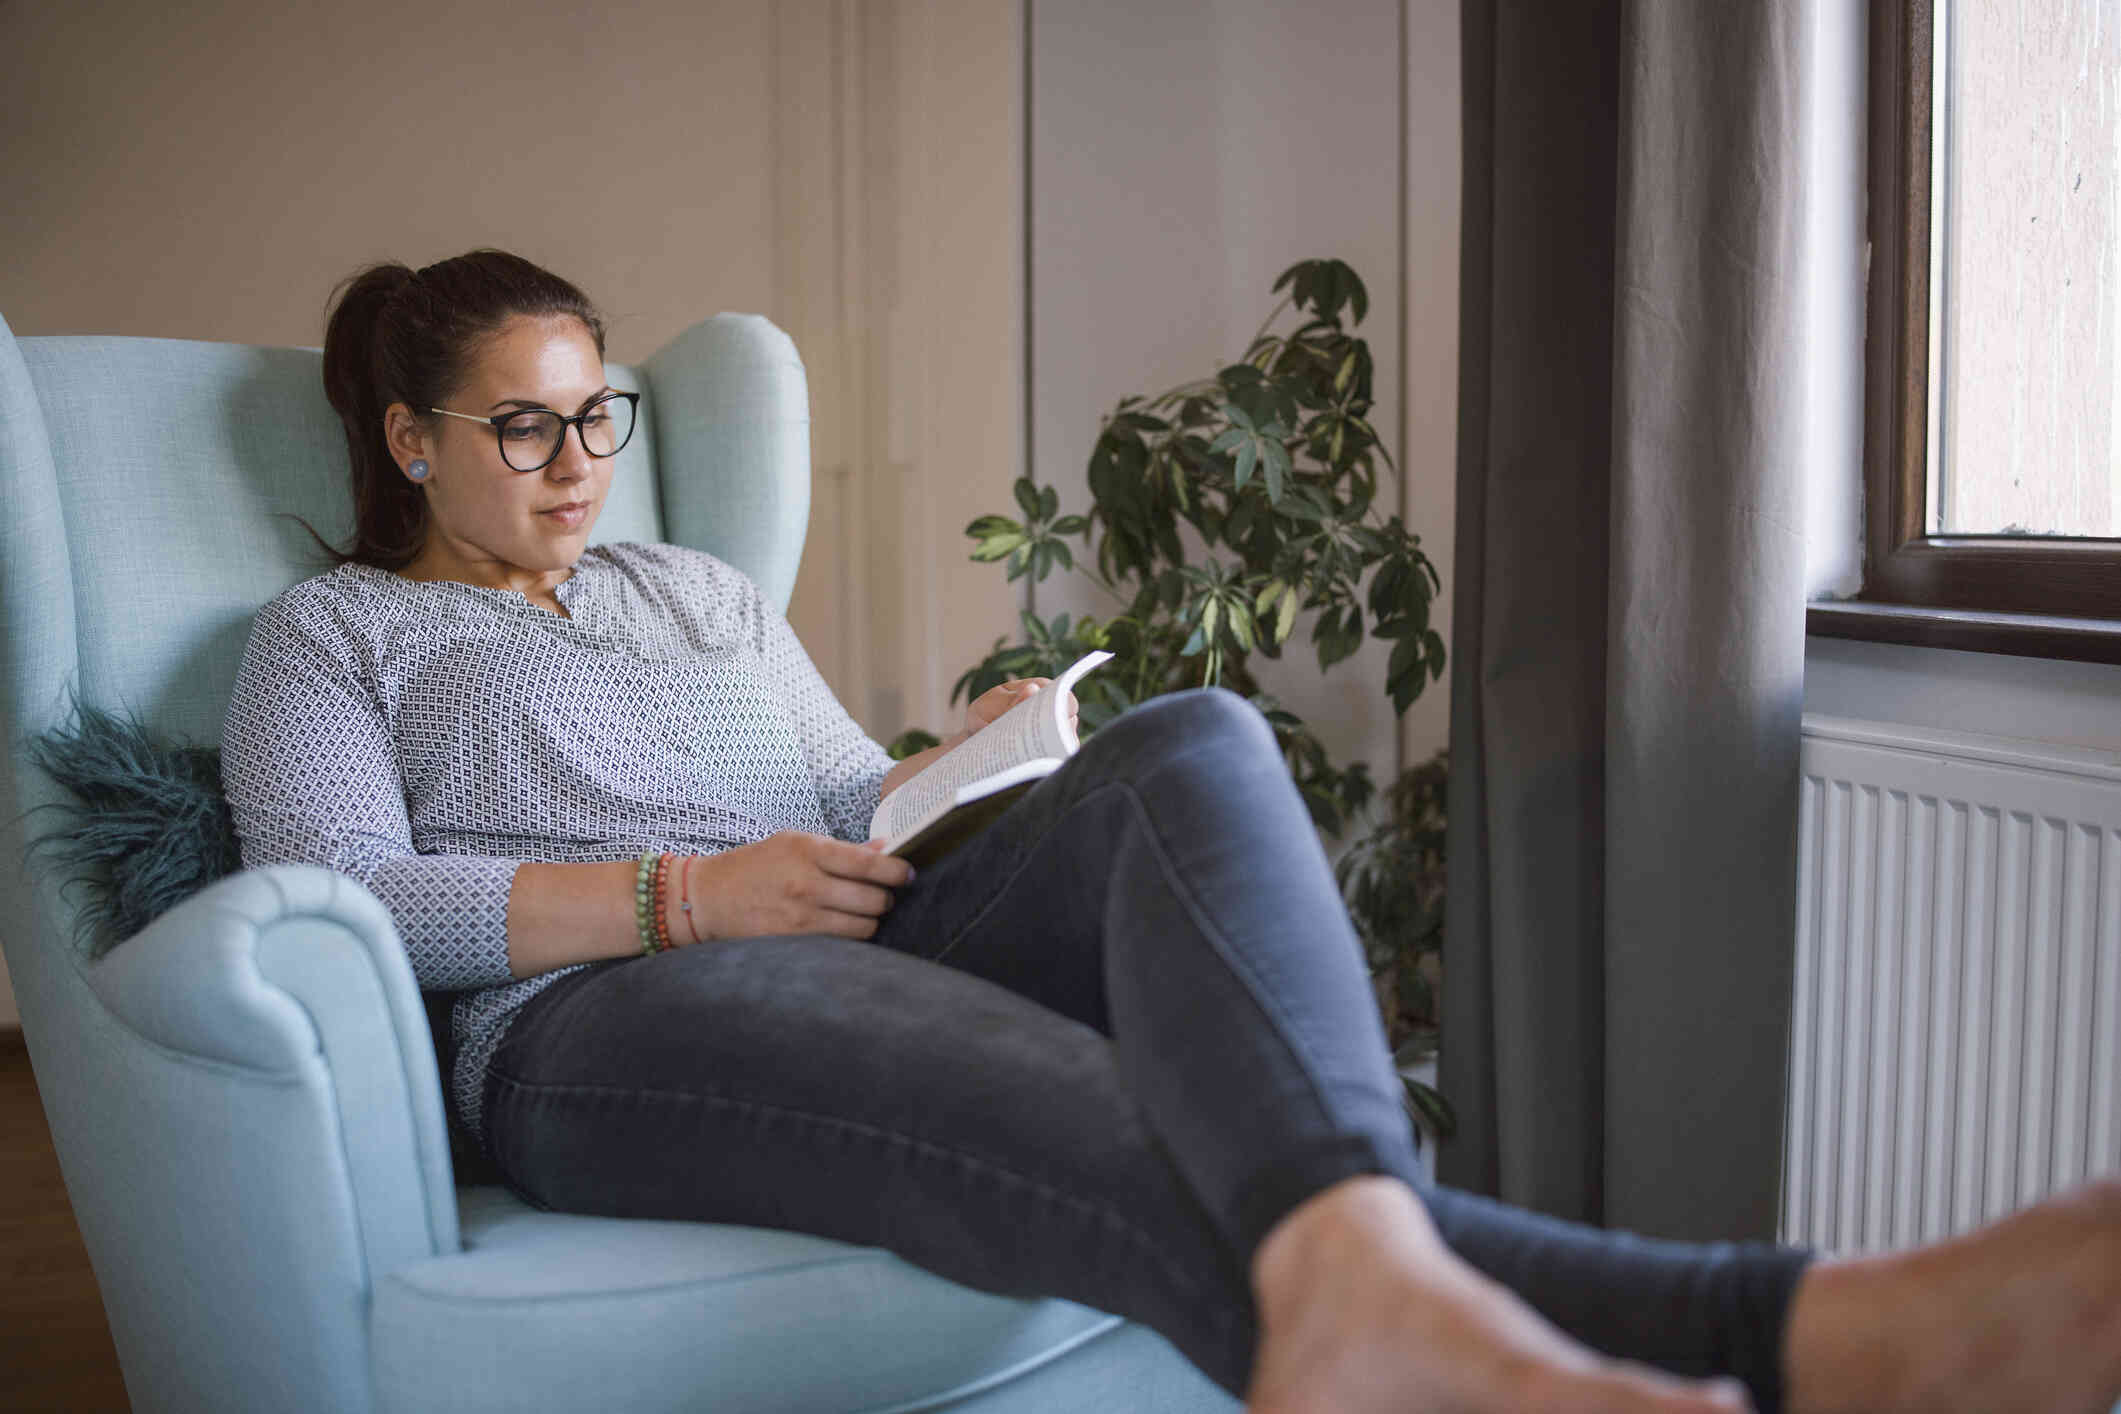 A woman with glasses sits in a blue armchair in her home while reading from a book.